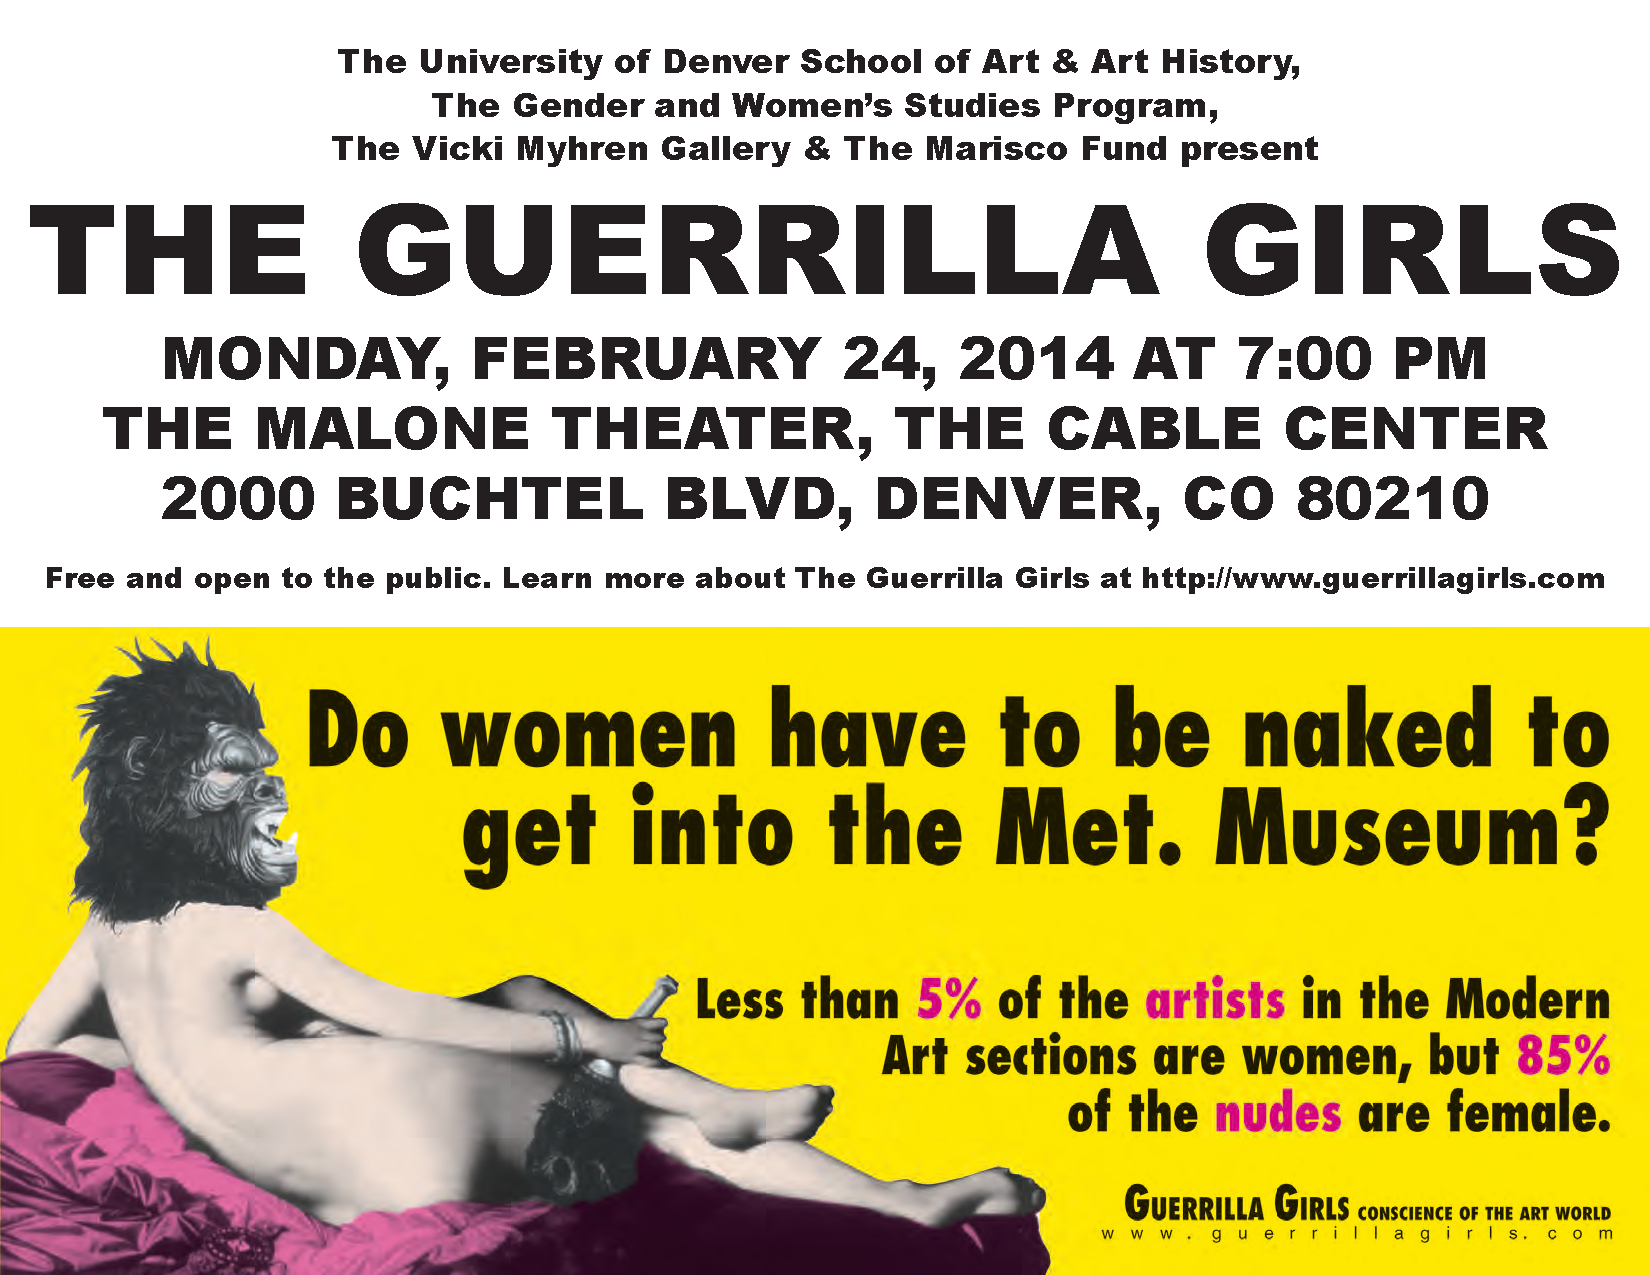 Counting Down to the Guerrilla Girls